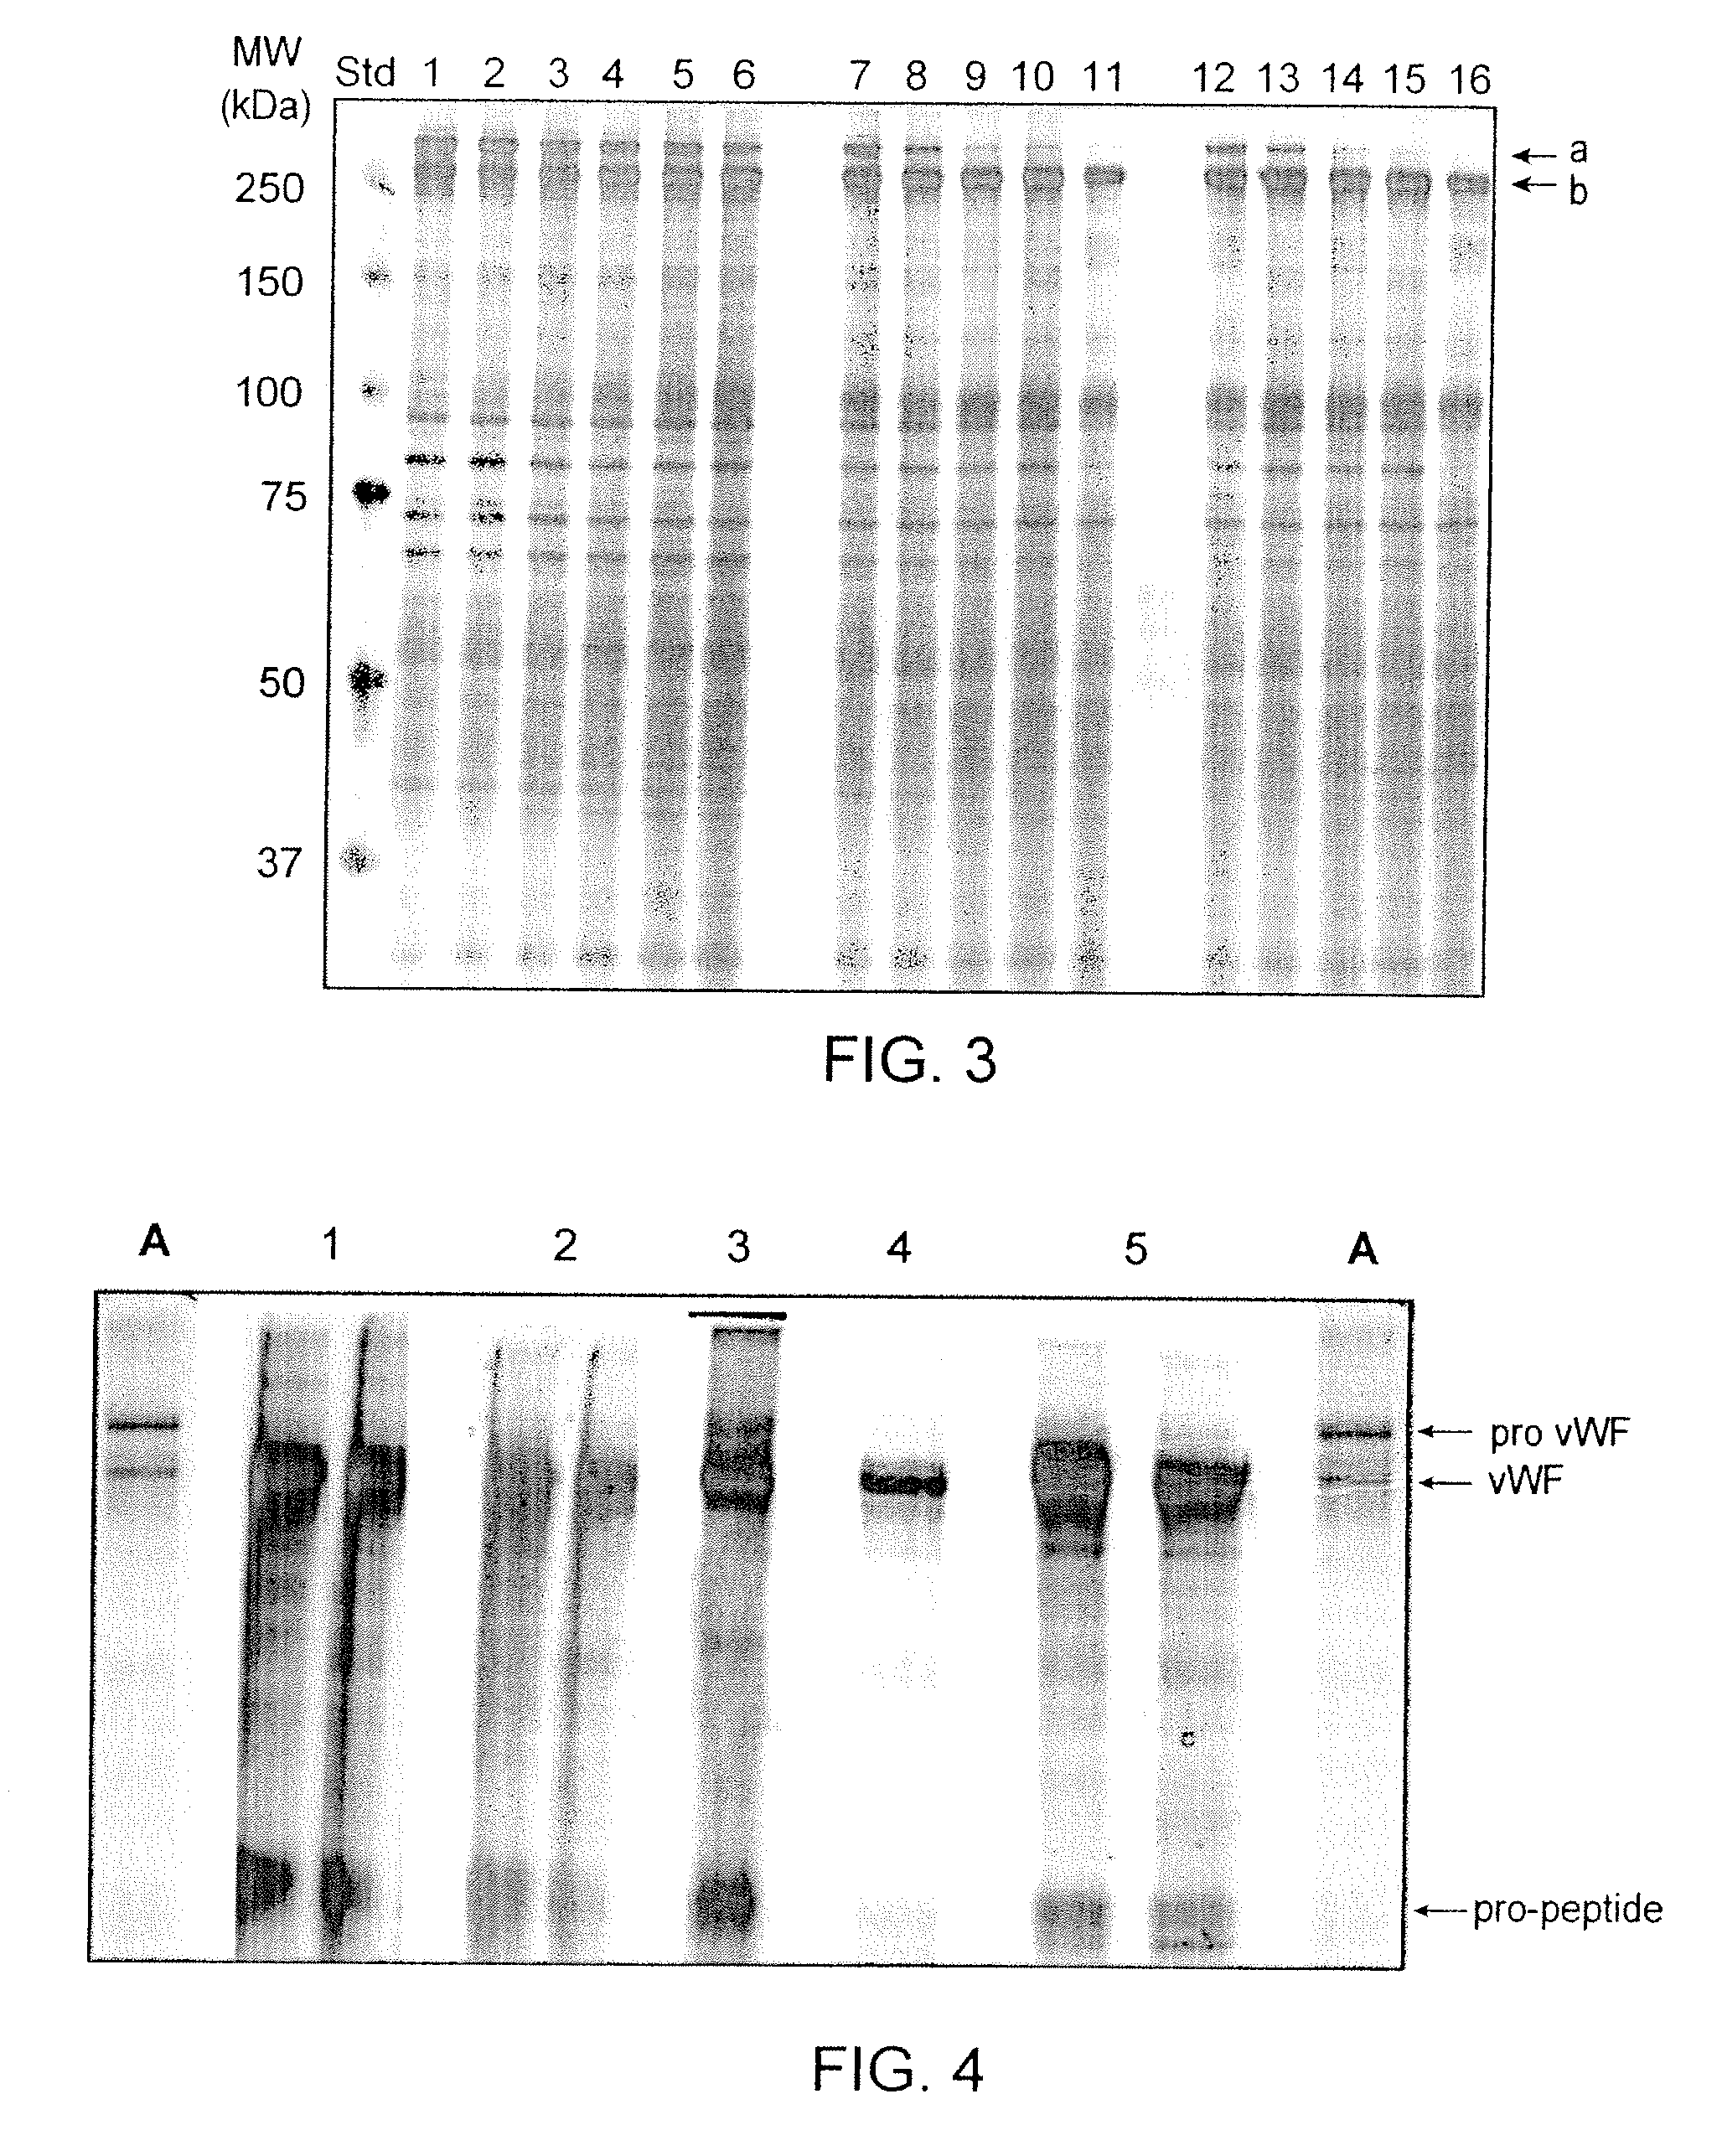 Method for producing mature VWF from VWF Pro-Peptide